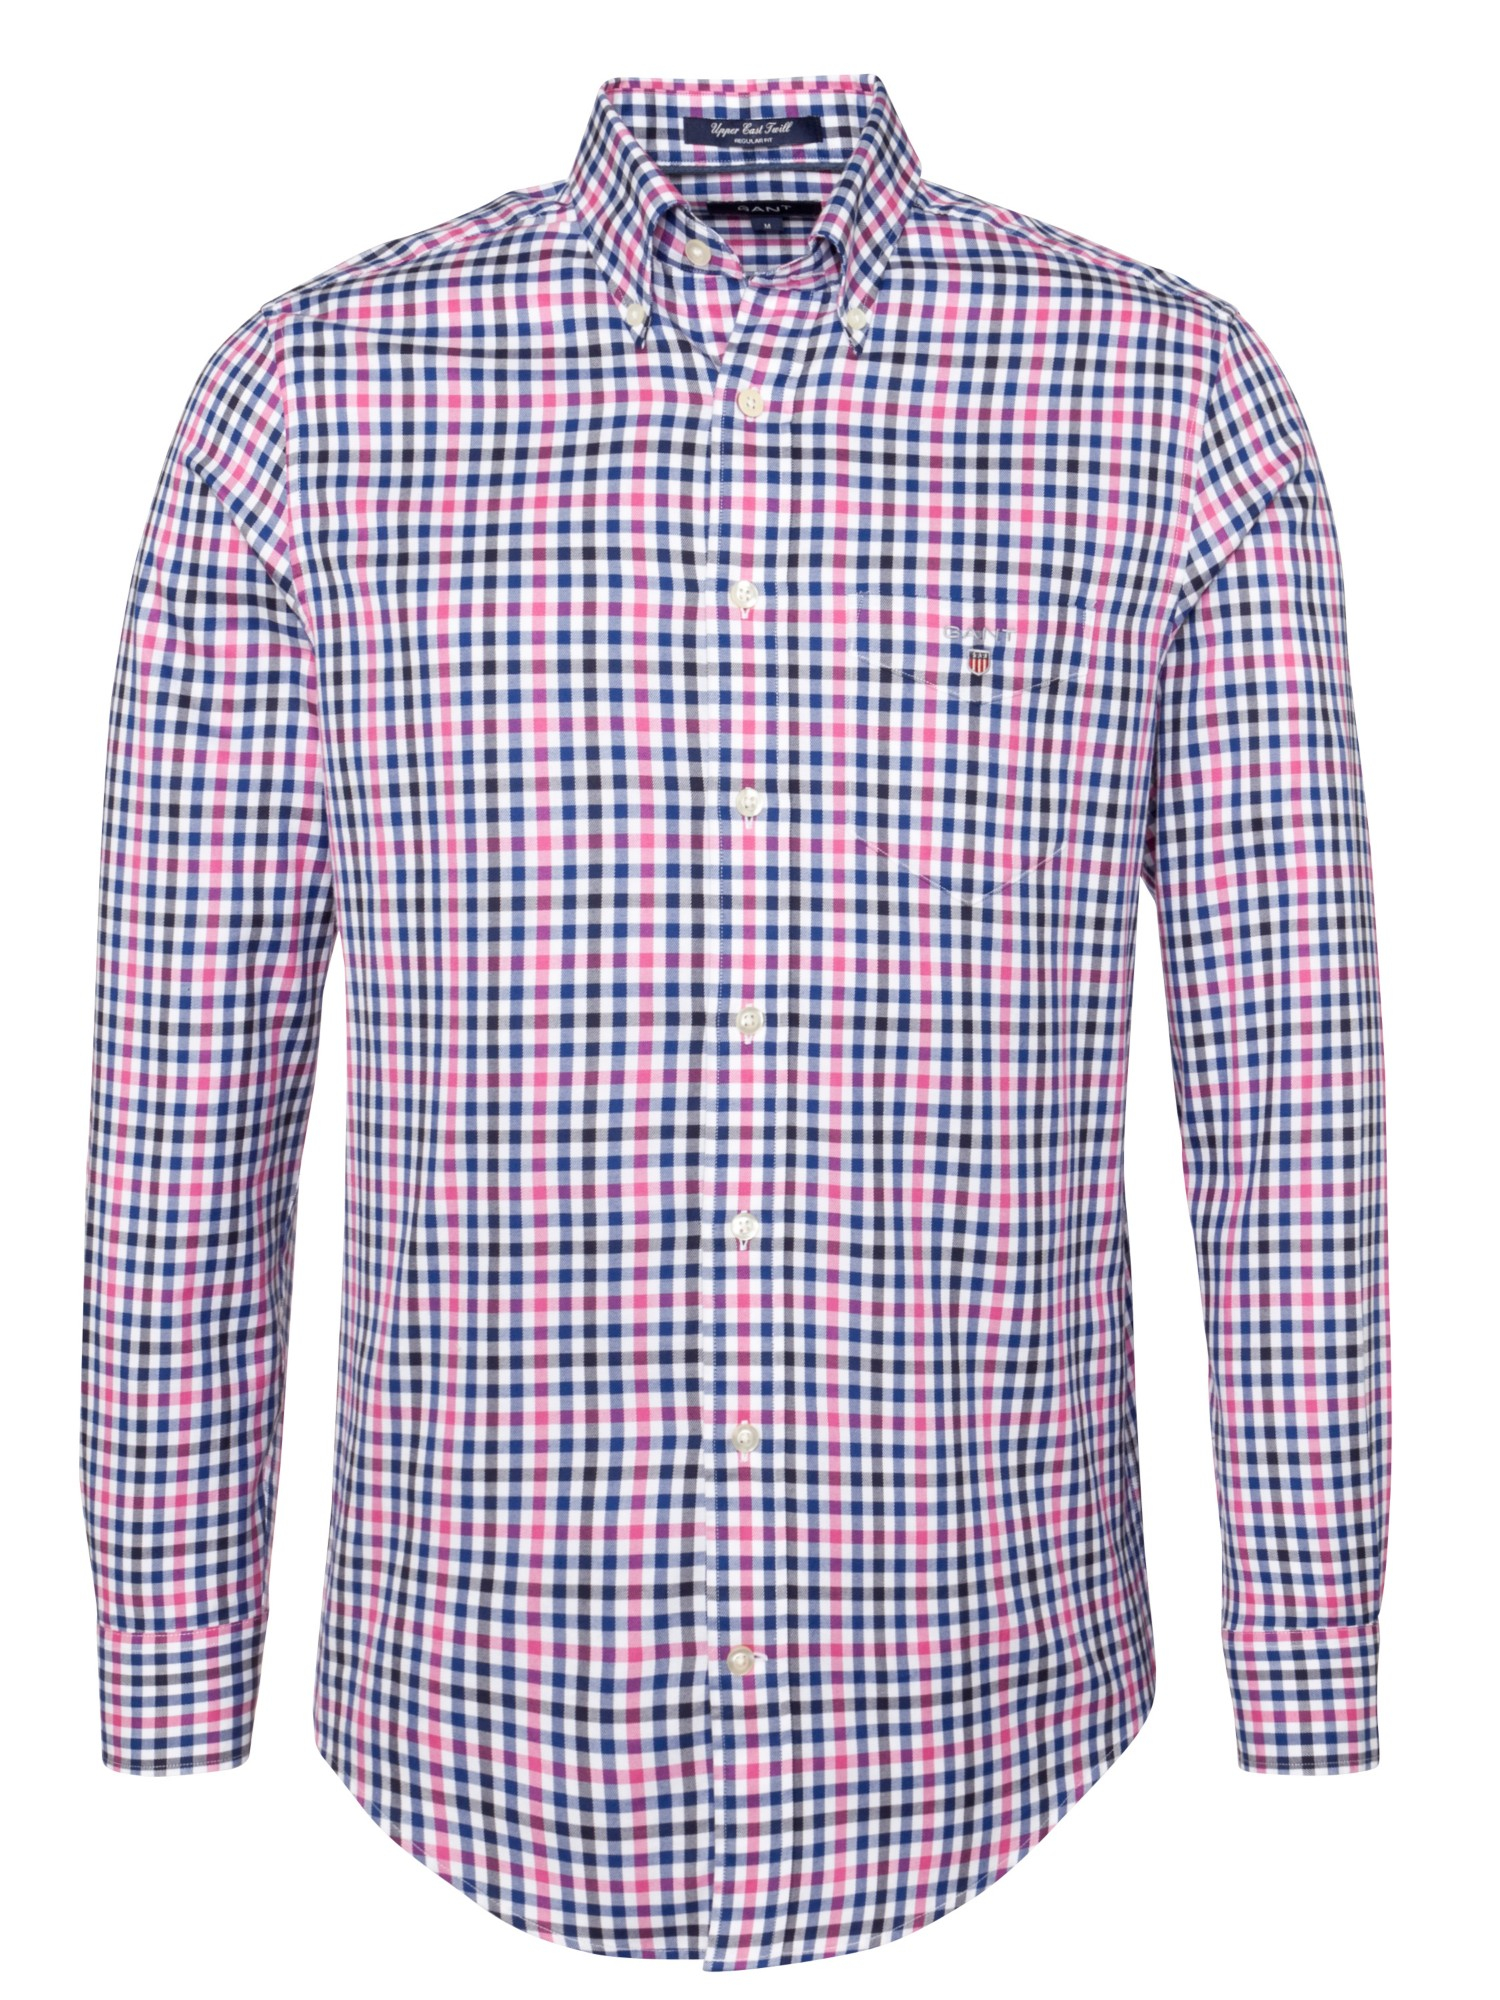 Gant Gingham Twill Classic Shirt in Pink for Men (Lobster) | Lyst